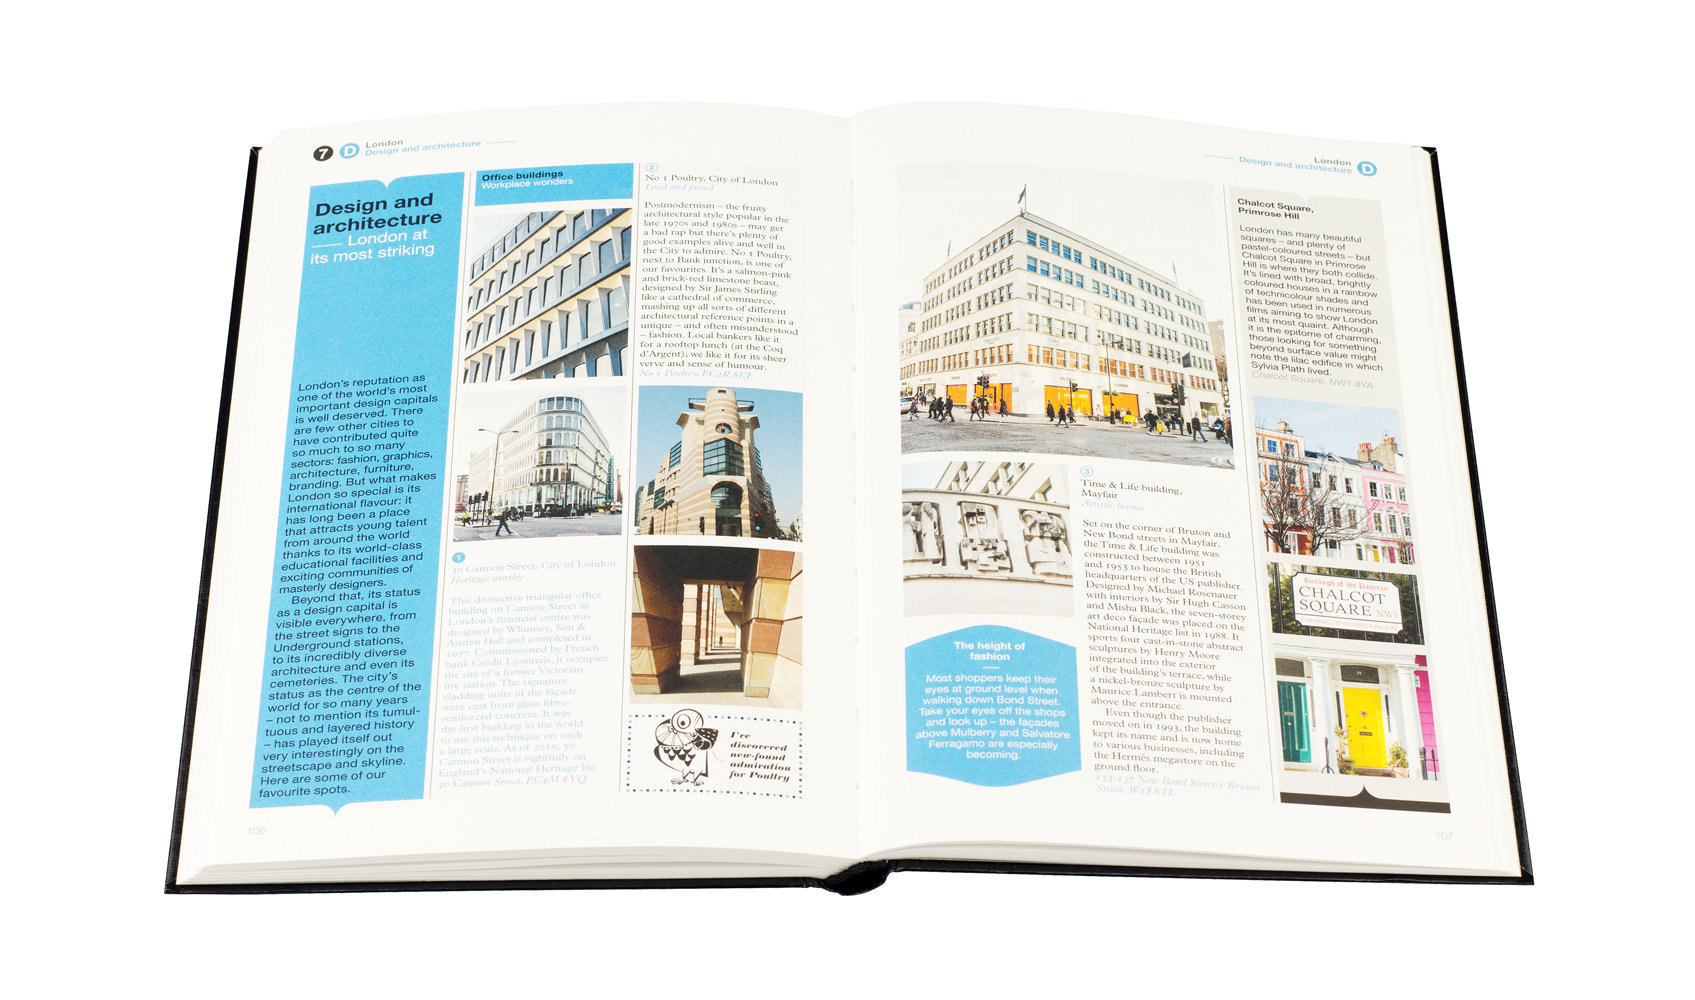 From London: the Monocle Travel Guide Series copyright Gestalten 2015